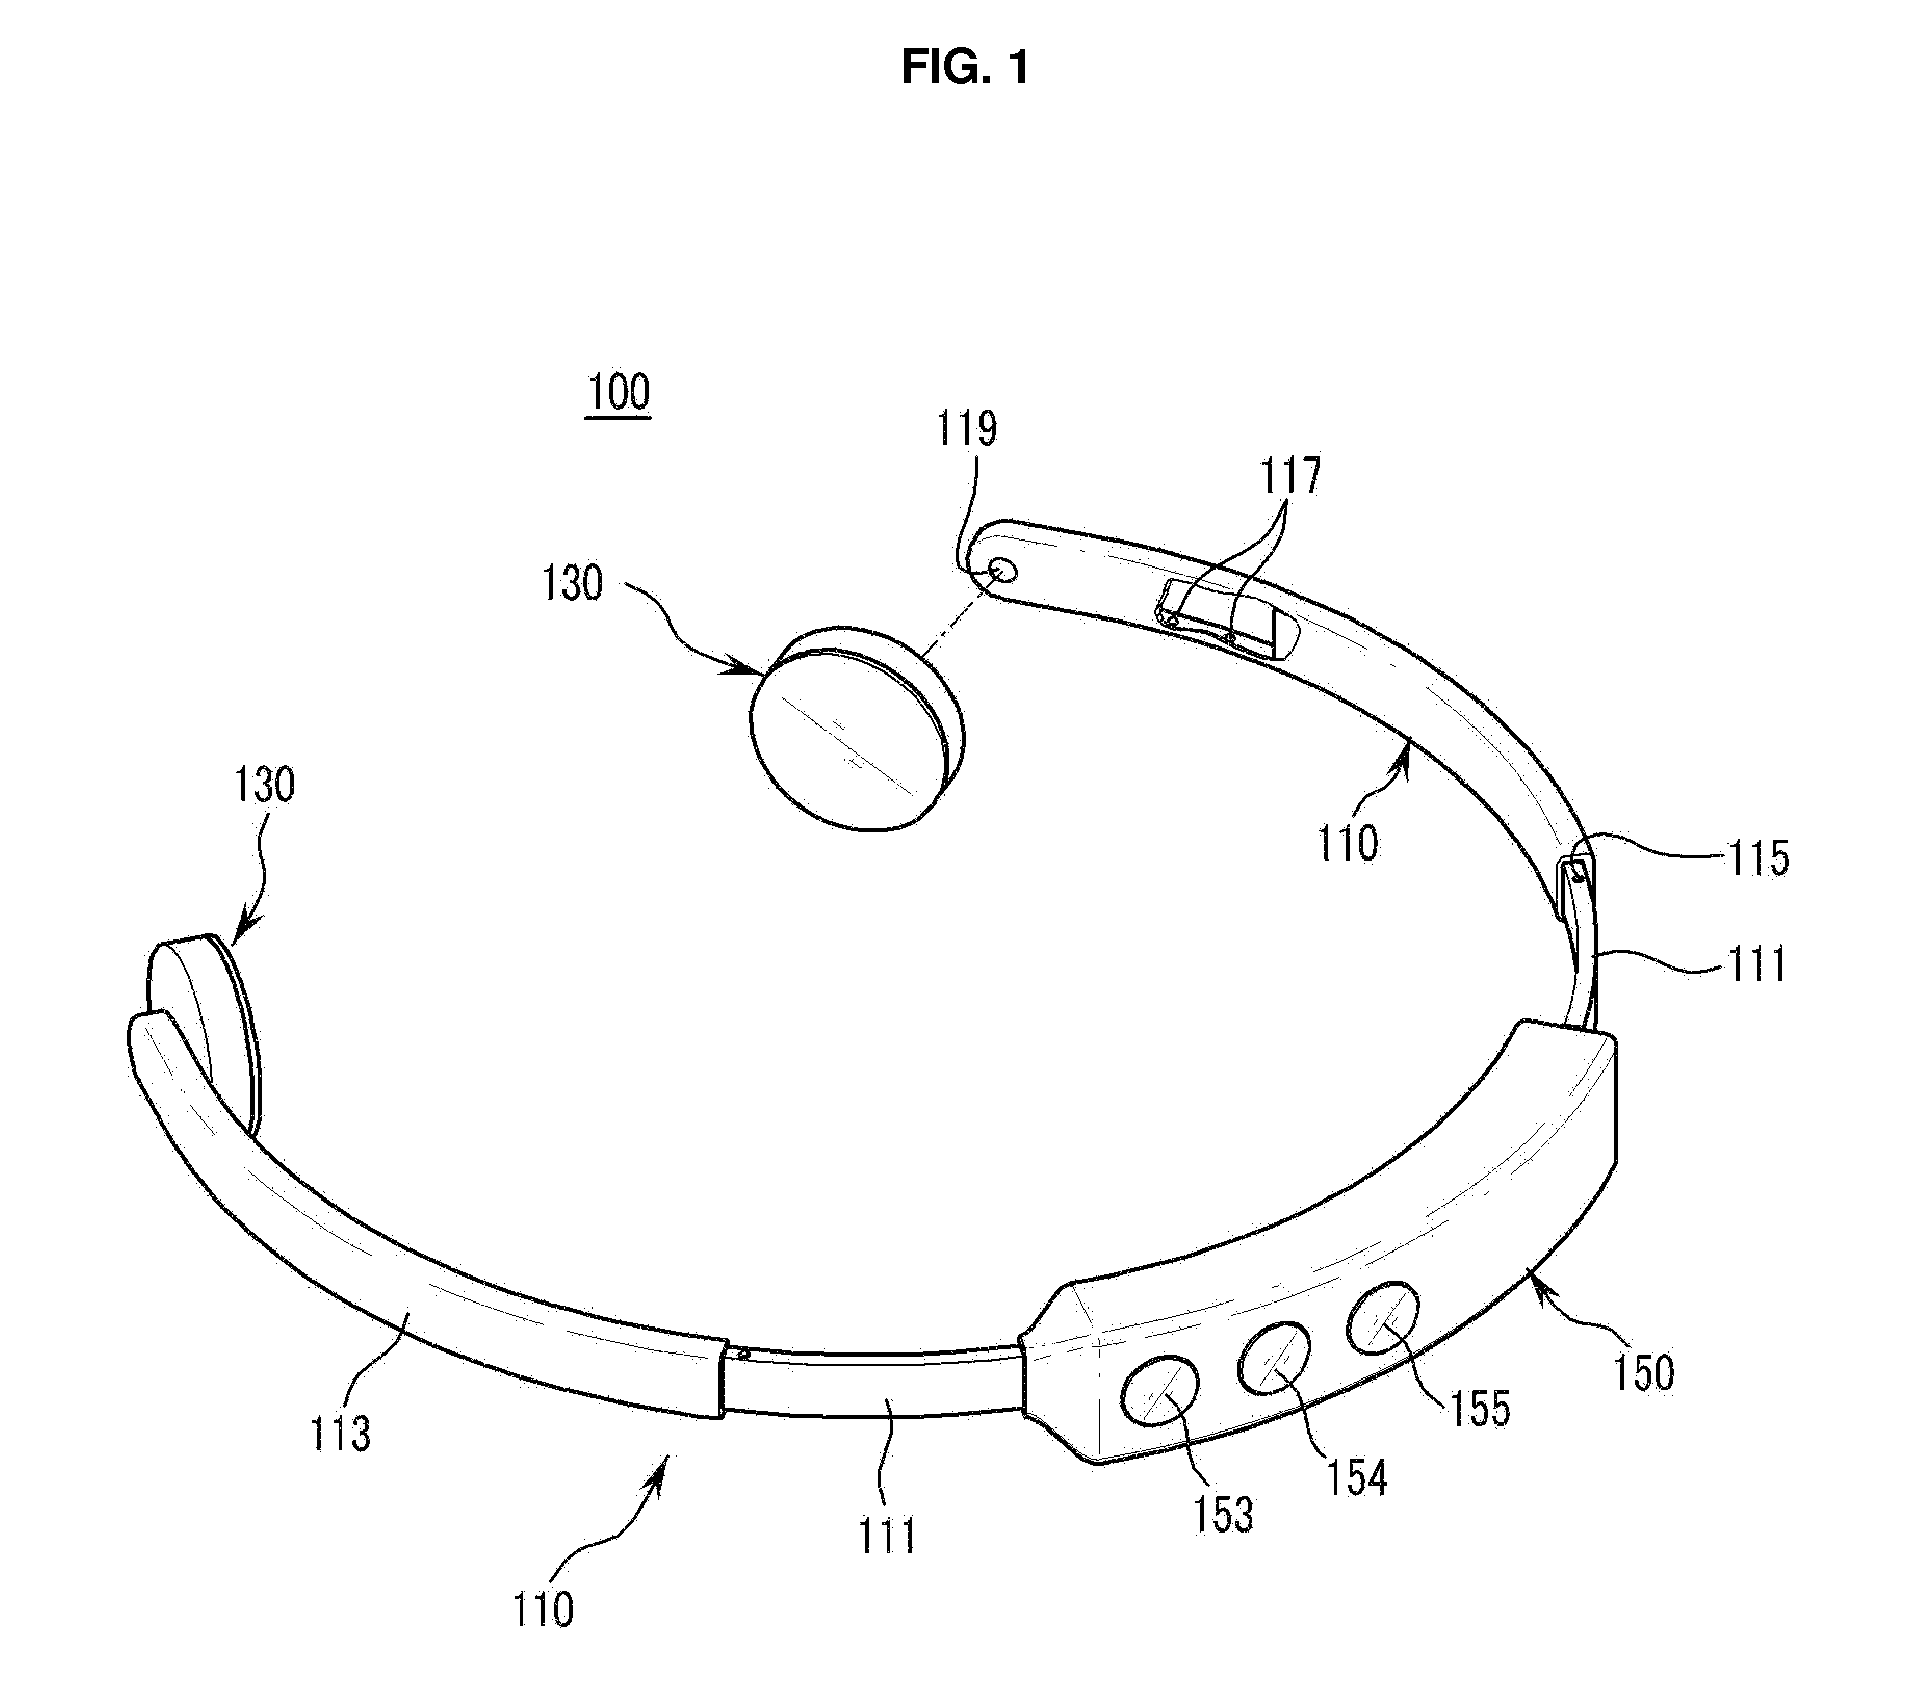 Hair band type apparatus for preventing sleepiness